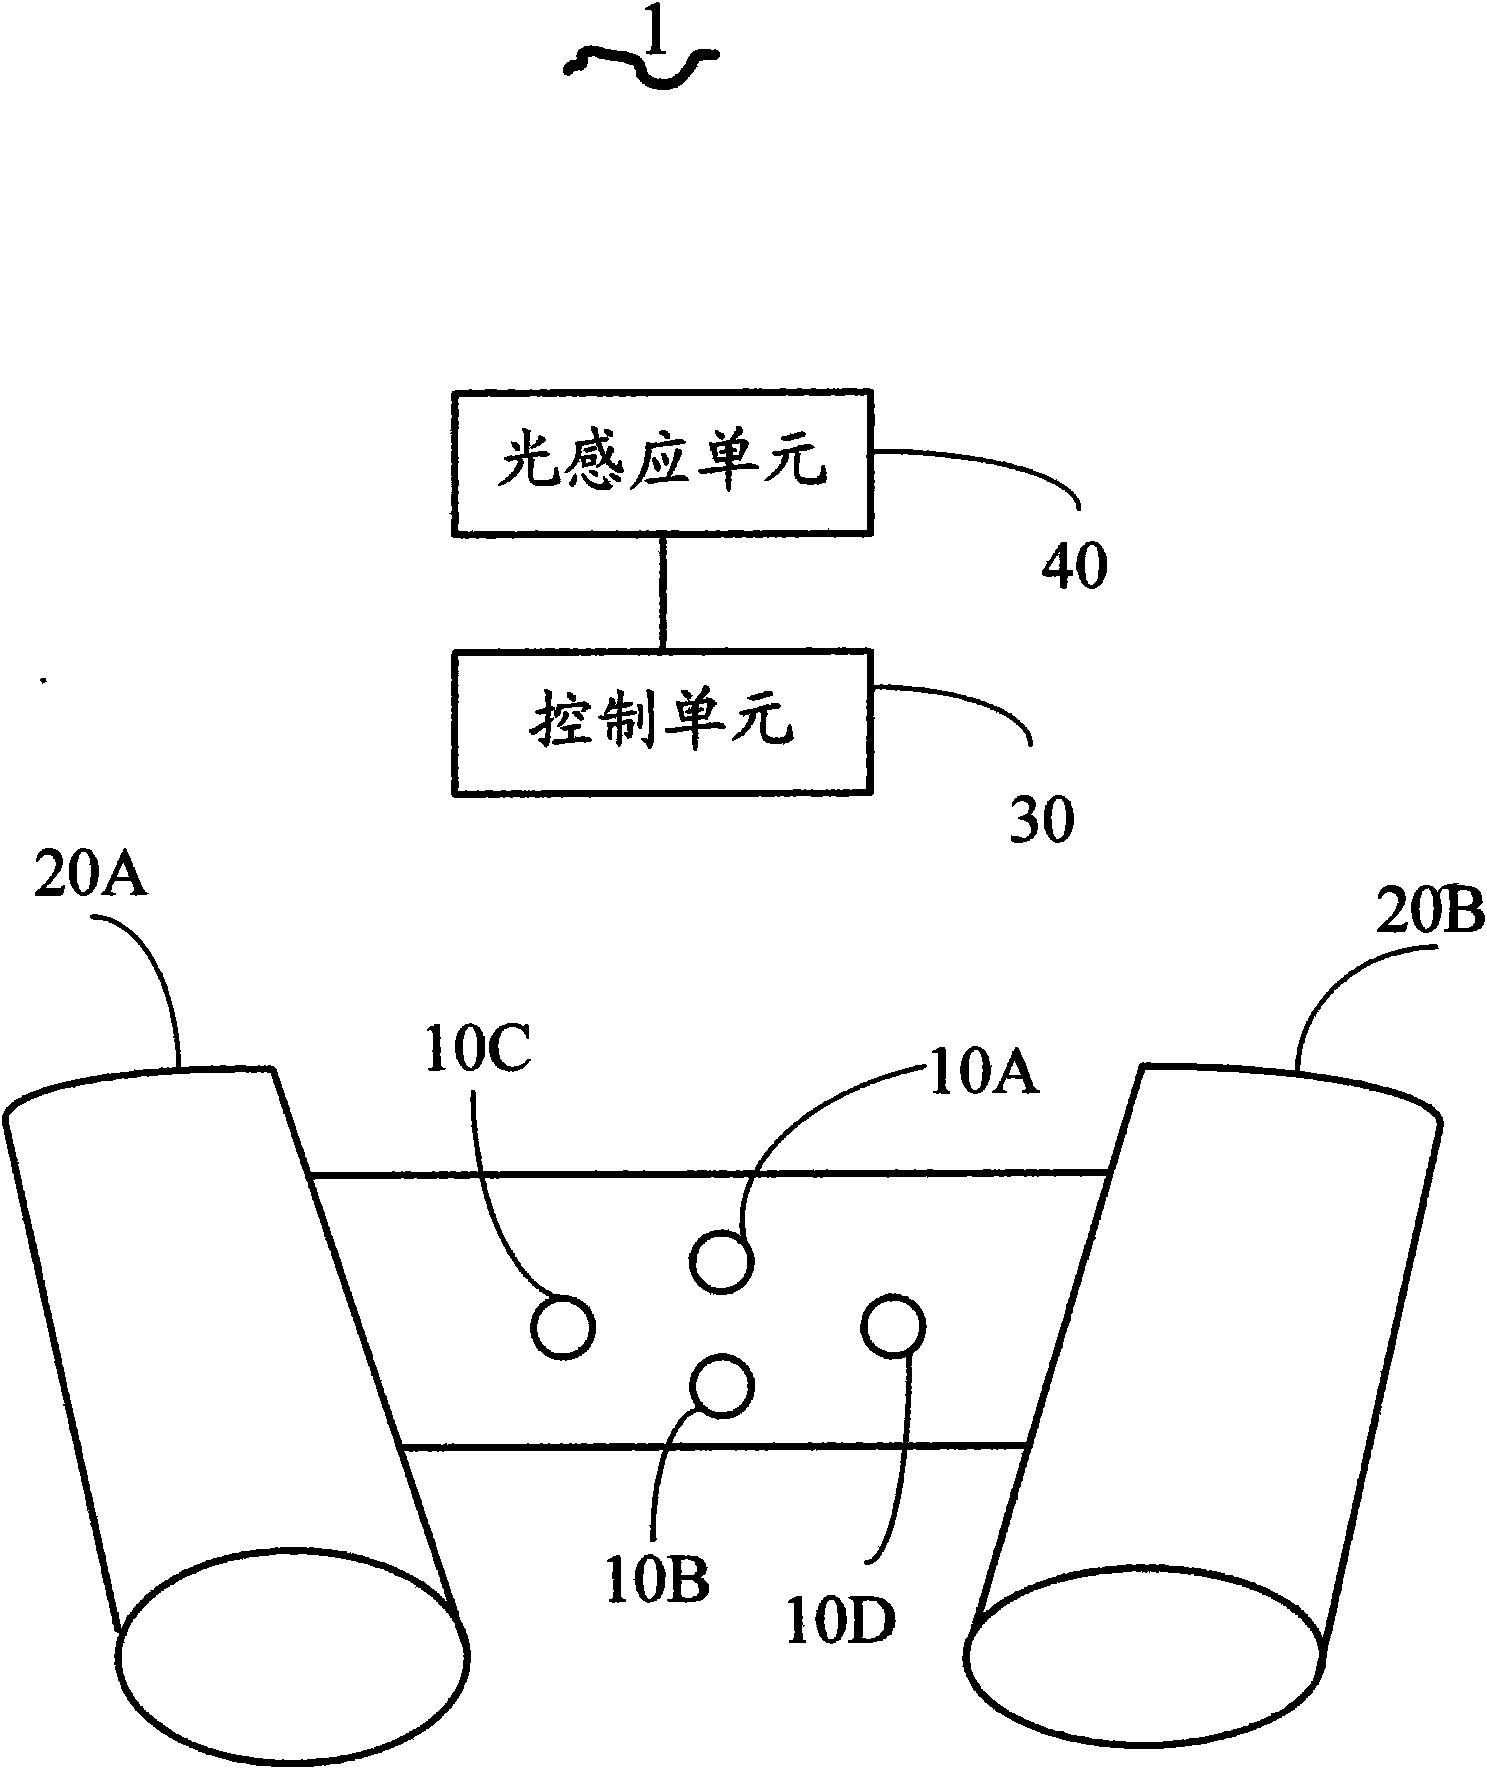 Electronic device with ranging function, ranging system and ranging method